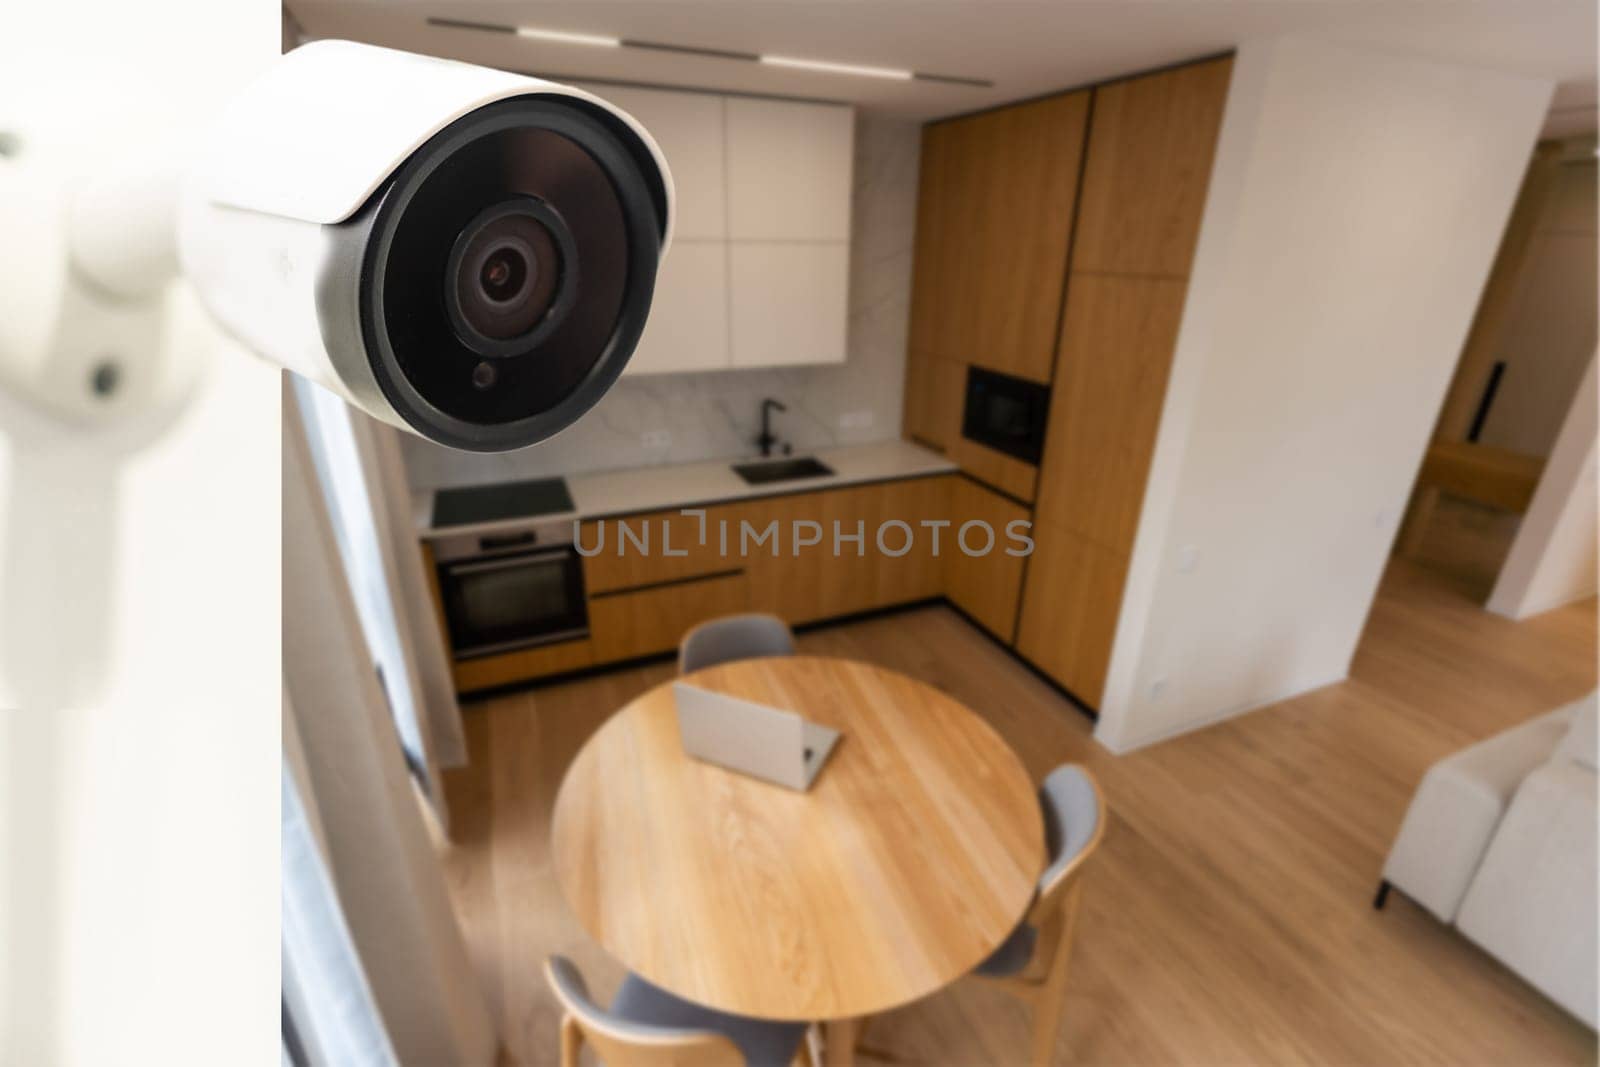 Modern CCTV camera installed in entryway of apartment building by Andelov13